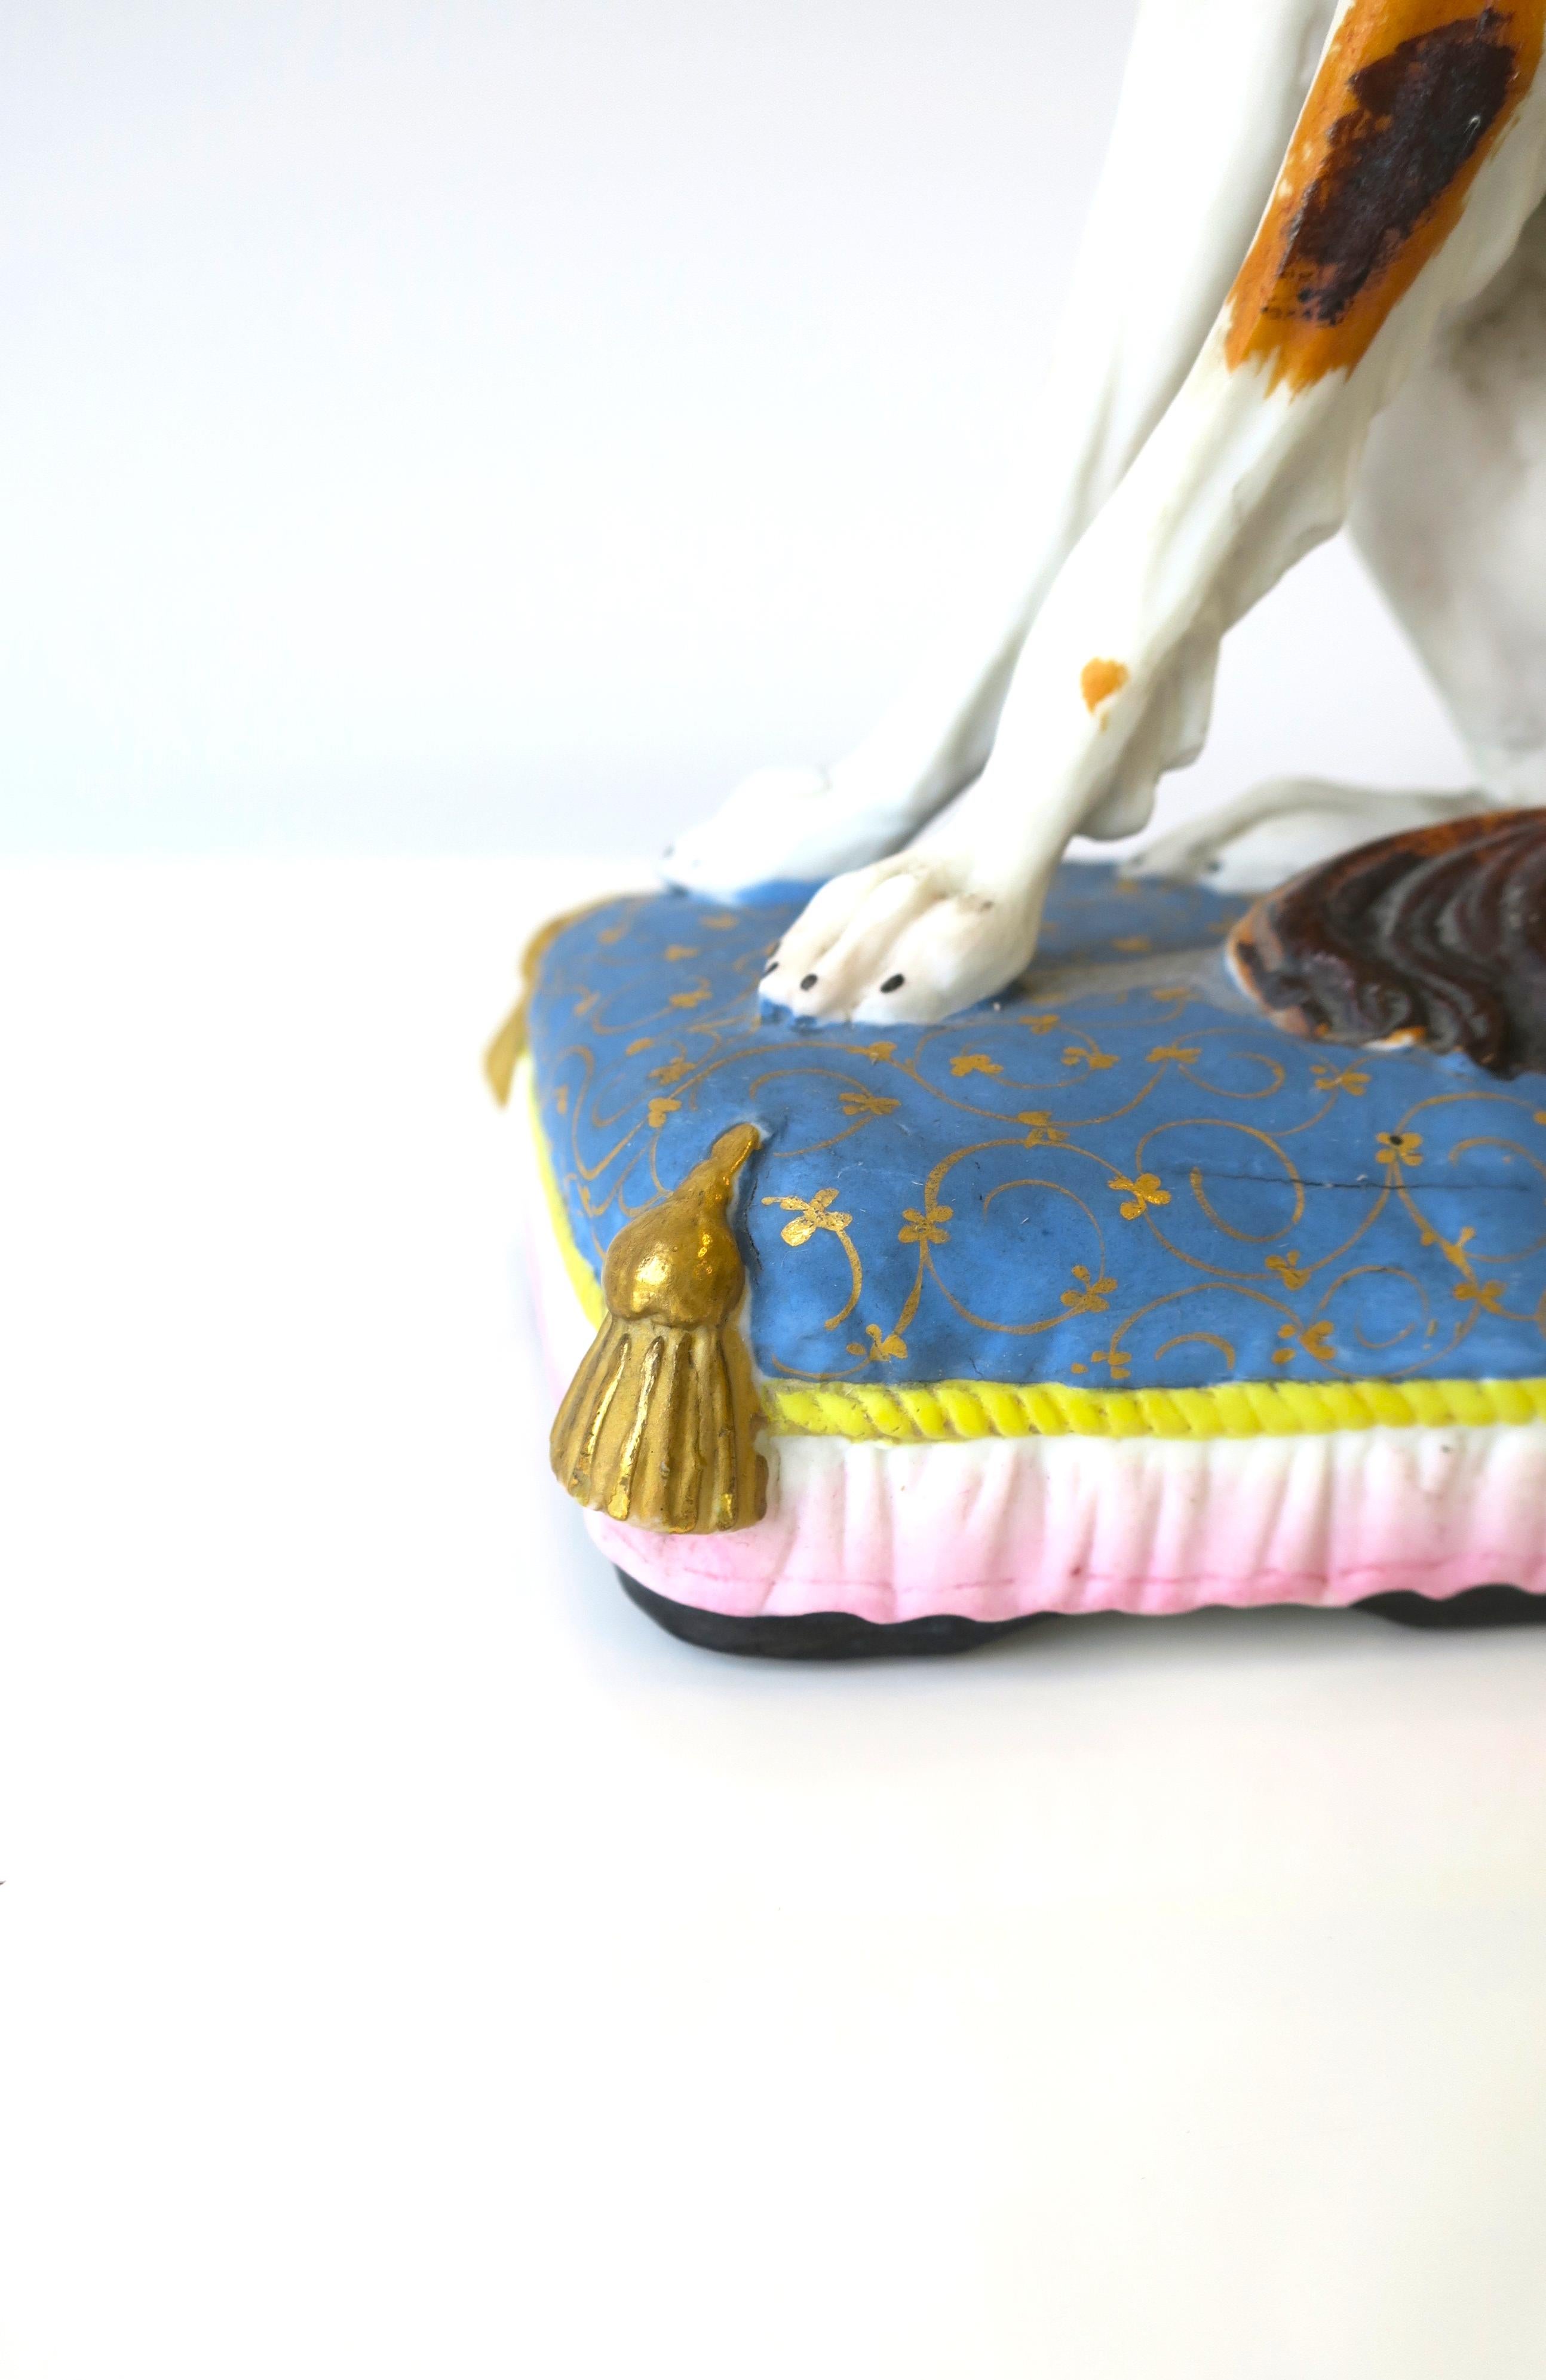 Porcelain Dog on Pillow with Tassels Decorative Object, circa Mid-20th Century For Sale 8